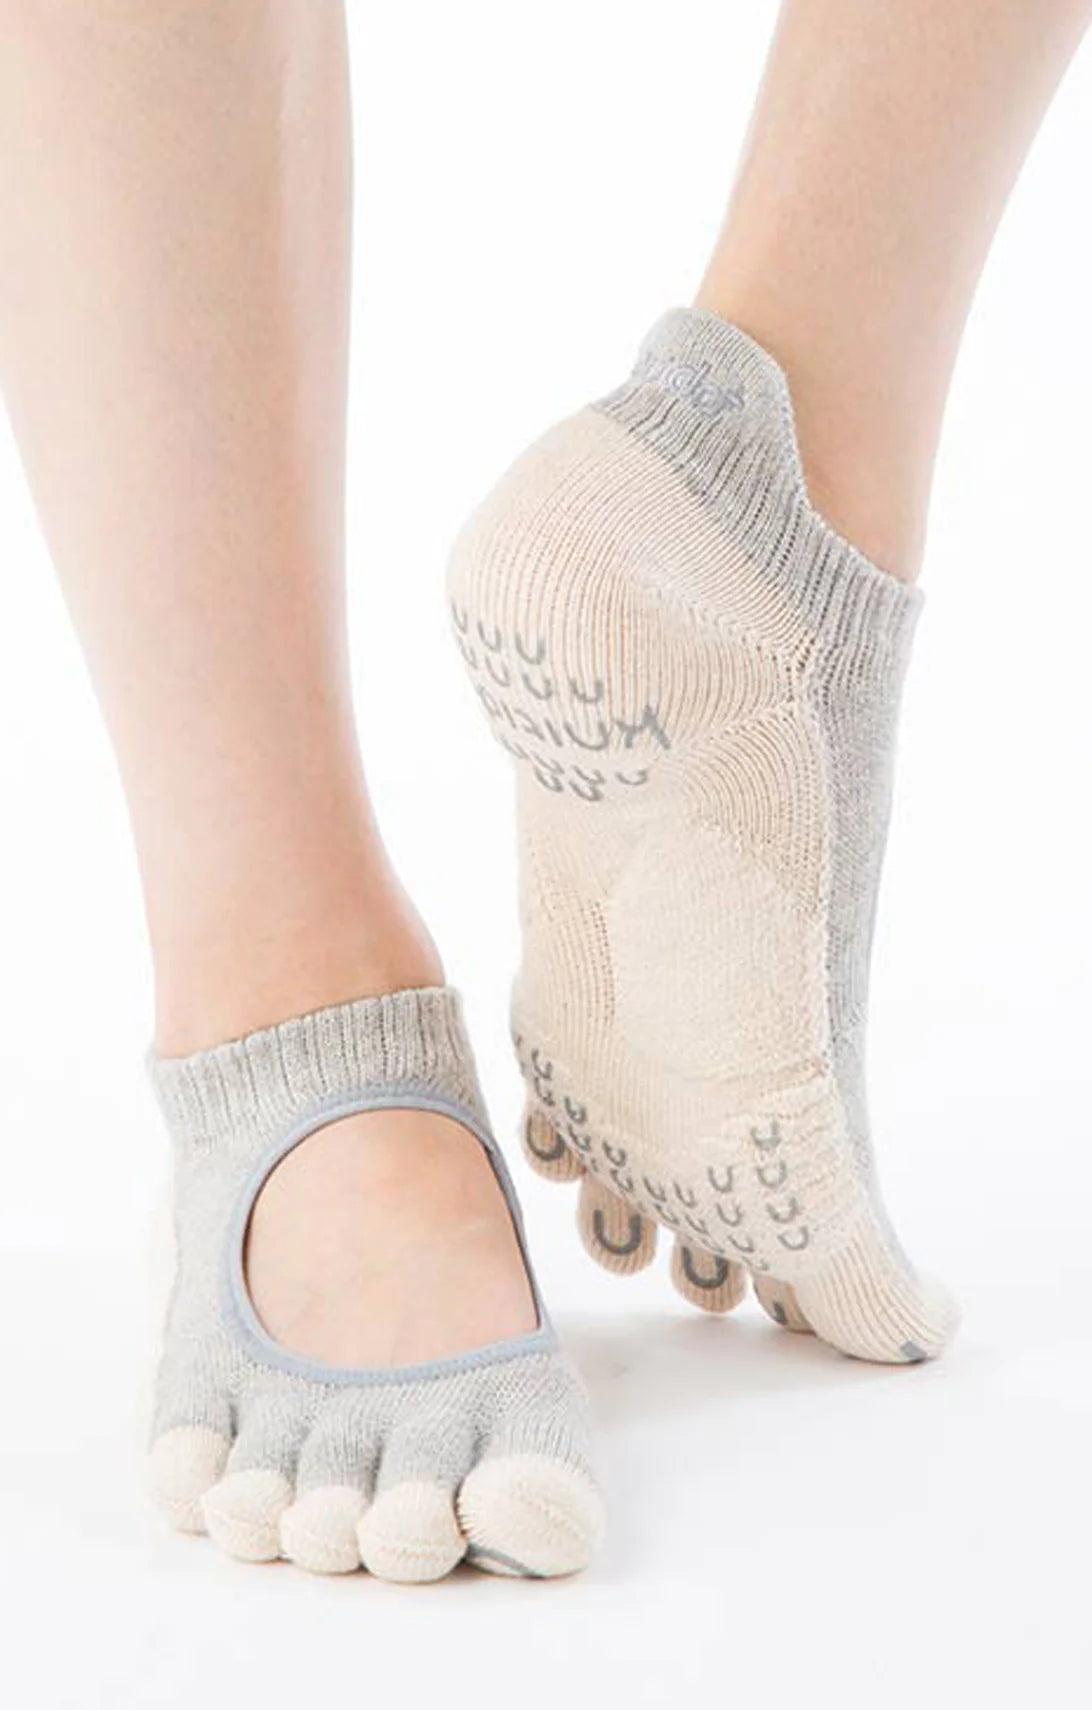 Arch Support, Grip Toe Socks